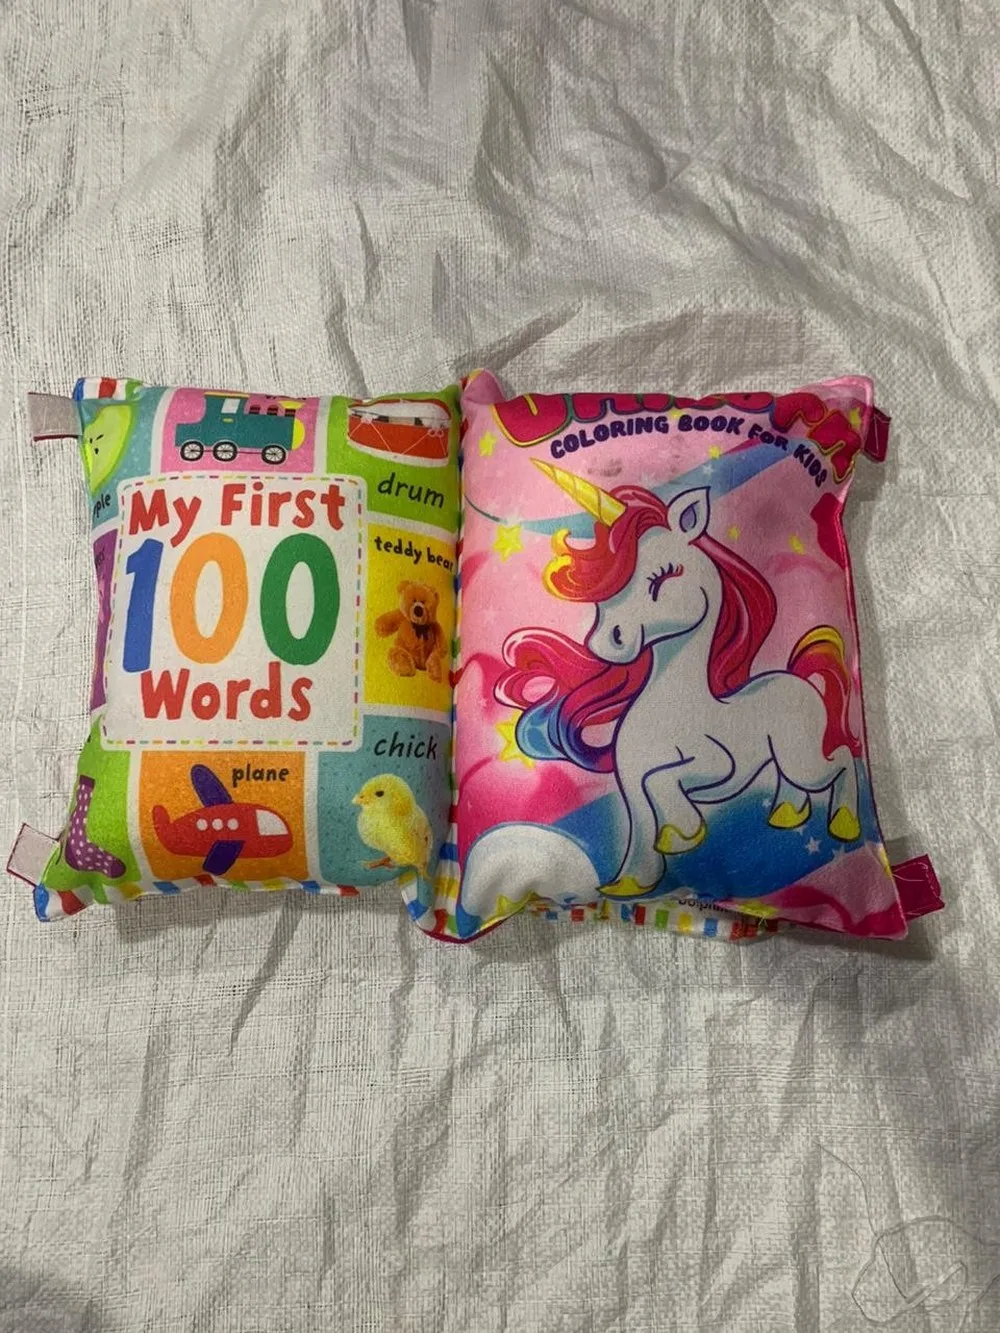 Learning book kids pillow, 100 Words, Unicorn